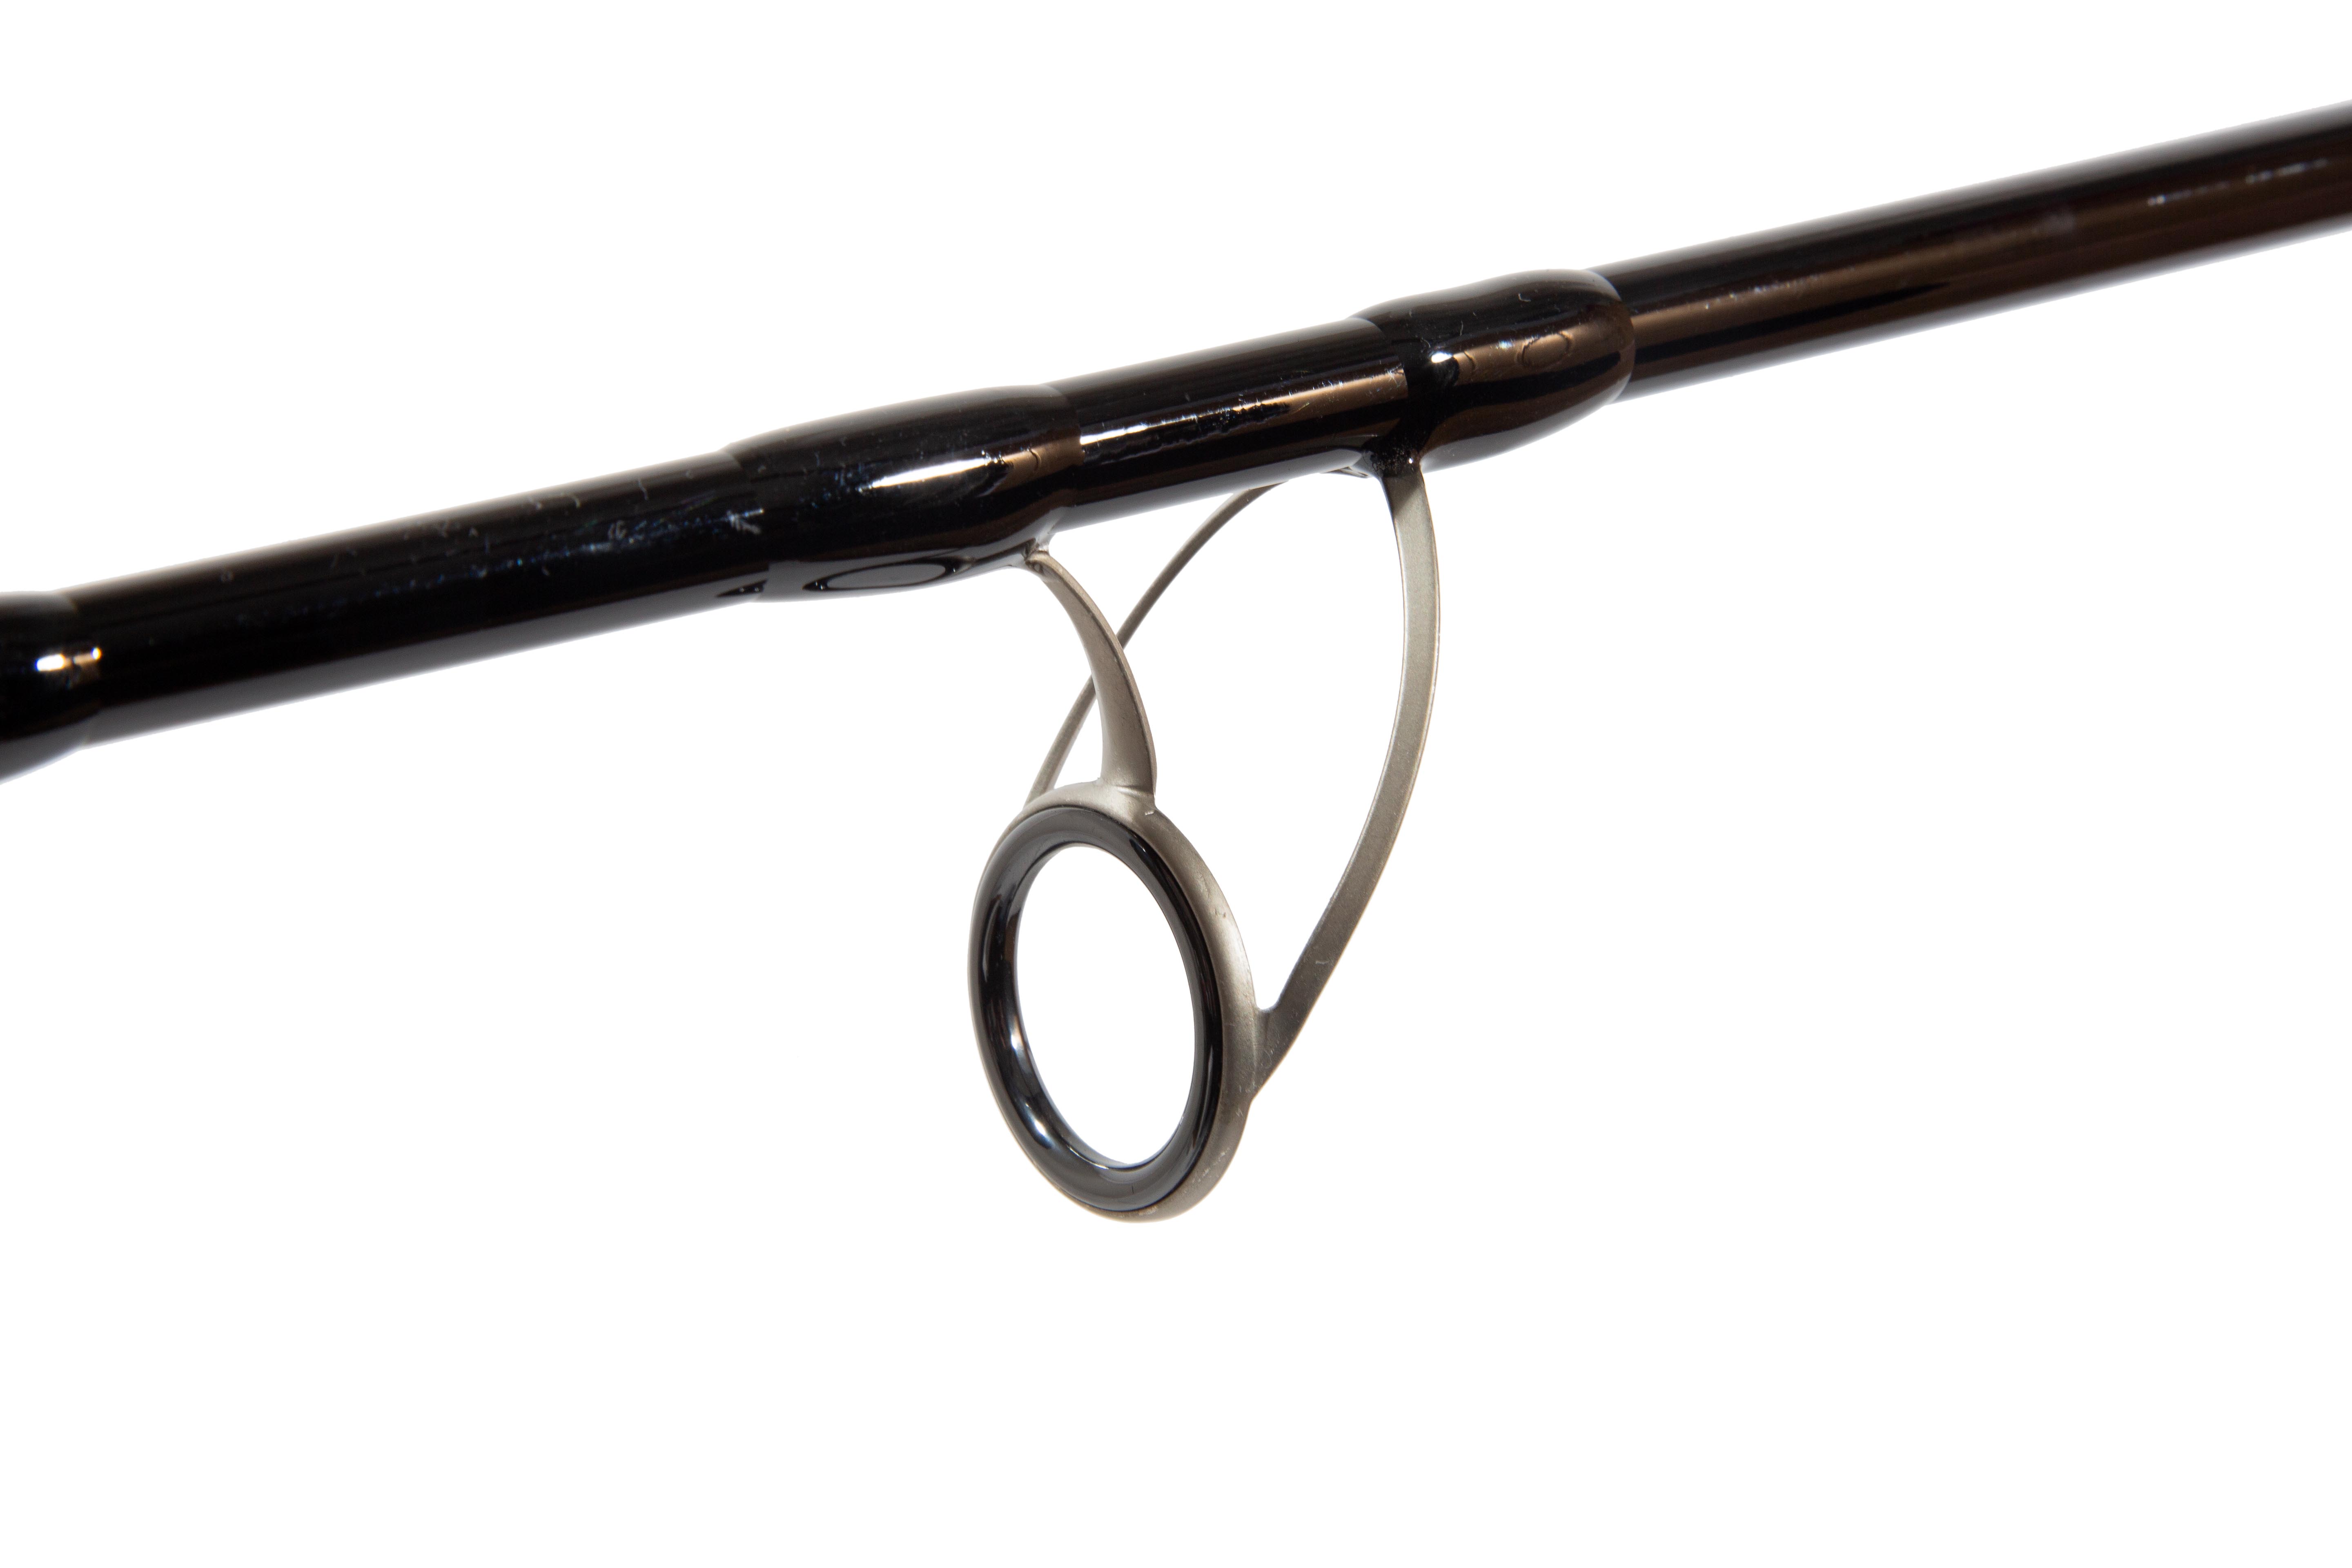 Ultimate Cat-Spin Catfish Spin Rod 2.70m (50-200g)